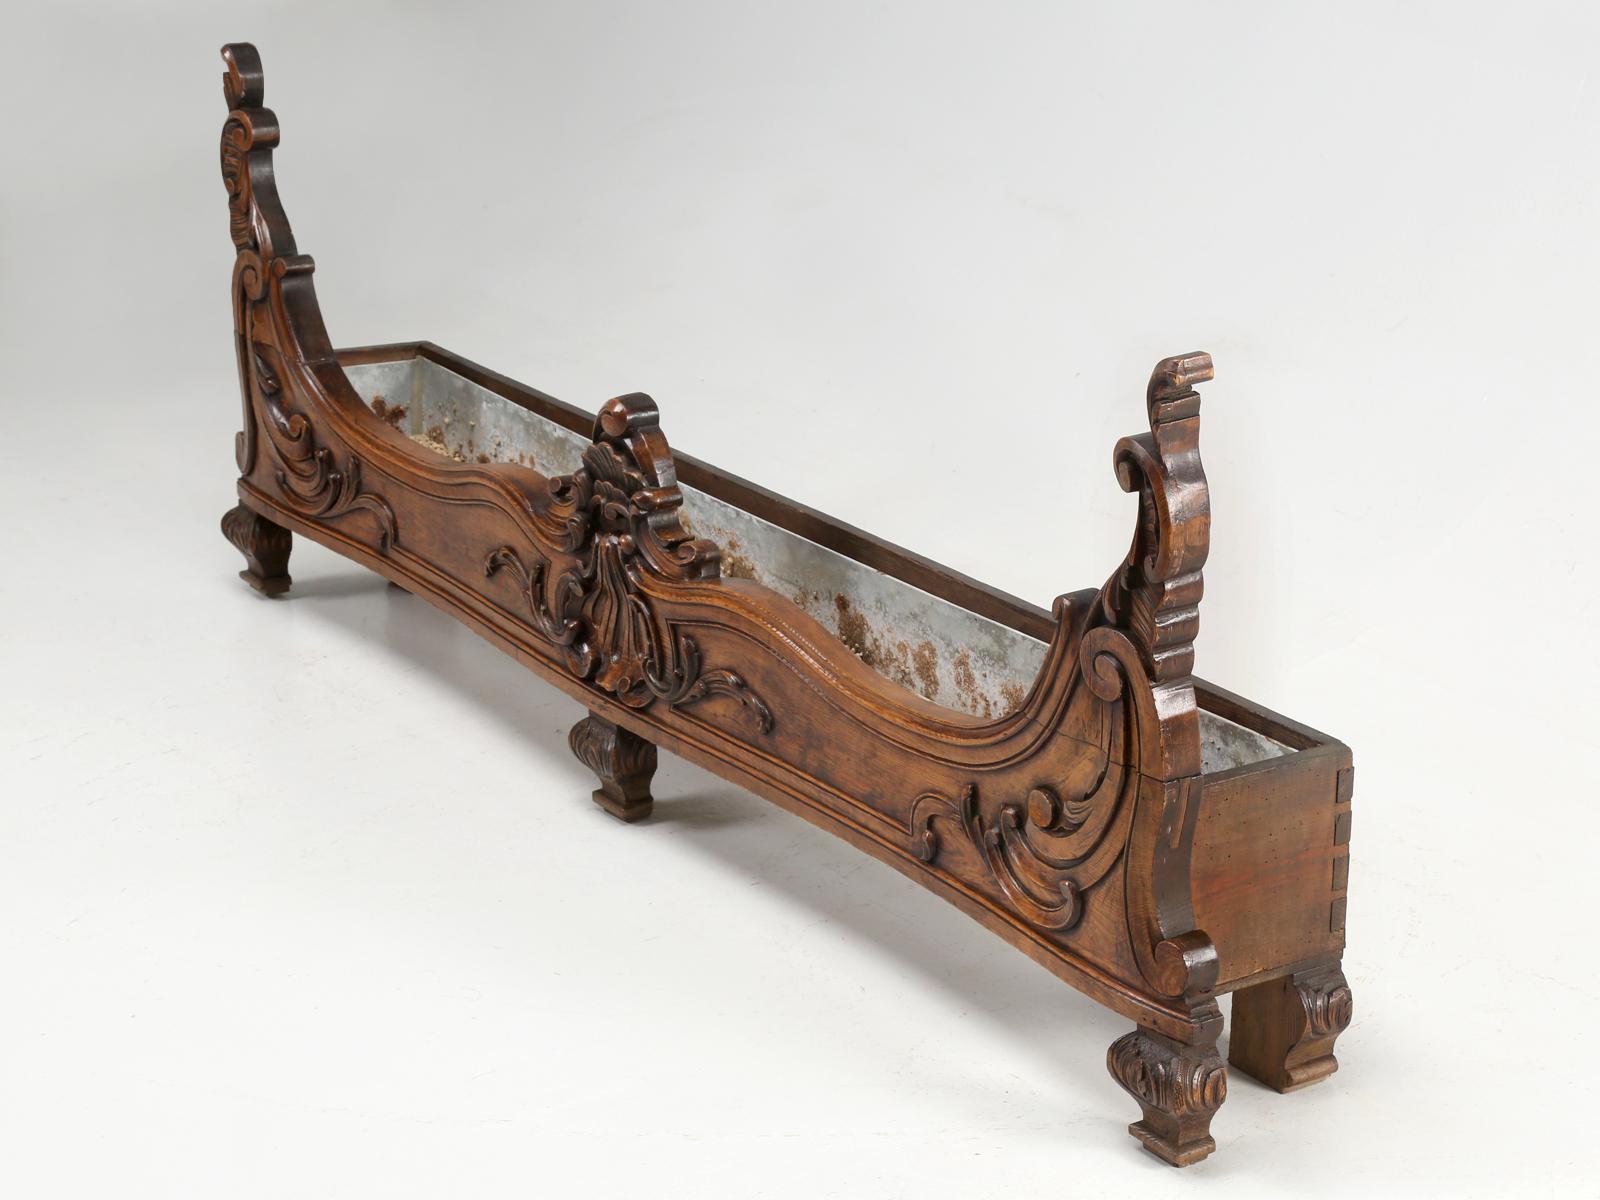 Jardinières, the French word for planter and this is an unusual antique French planter or jardinière, looks great in a front entry, as we have used it for the last 10 years, or in a hallway, or any place for that matter. Made of solid walnut with a